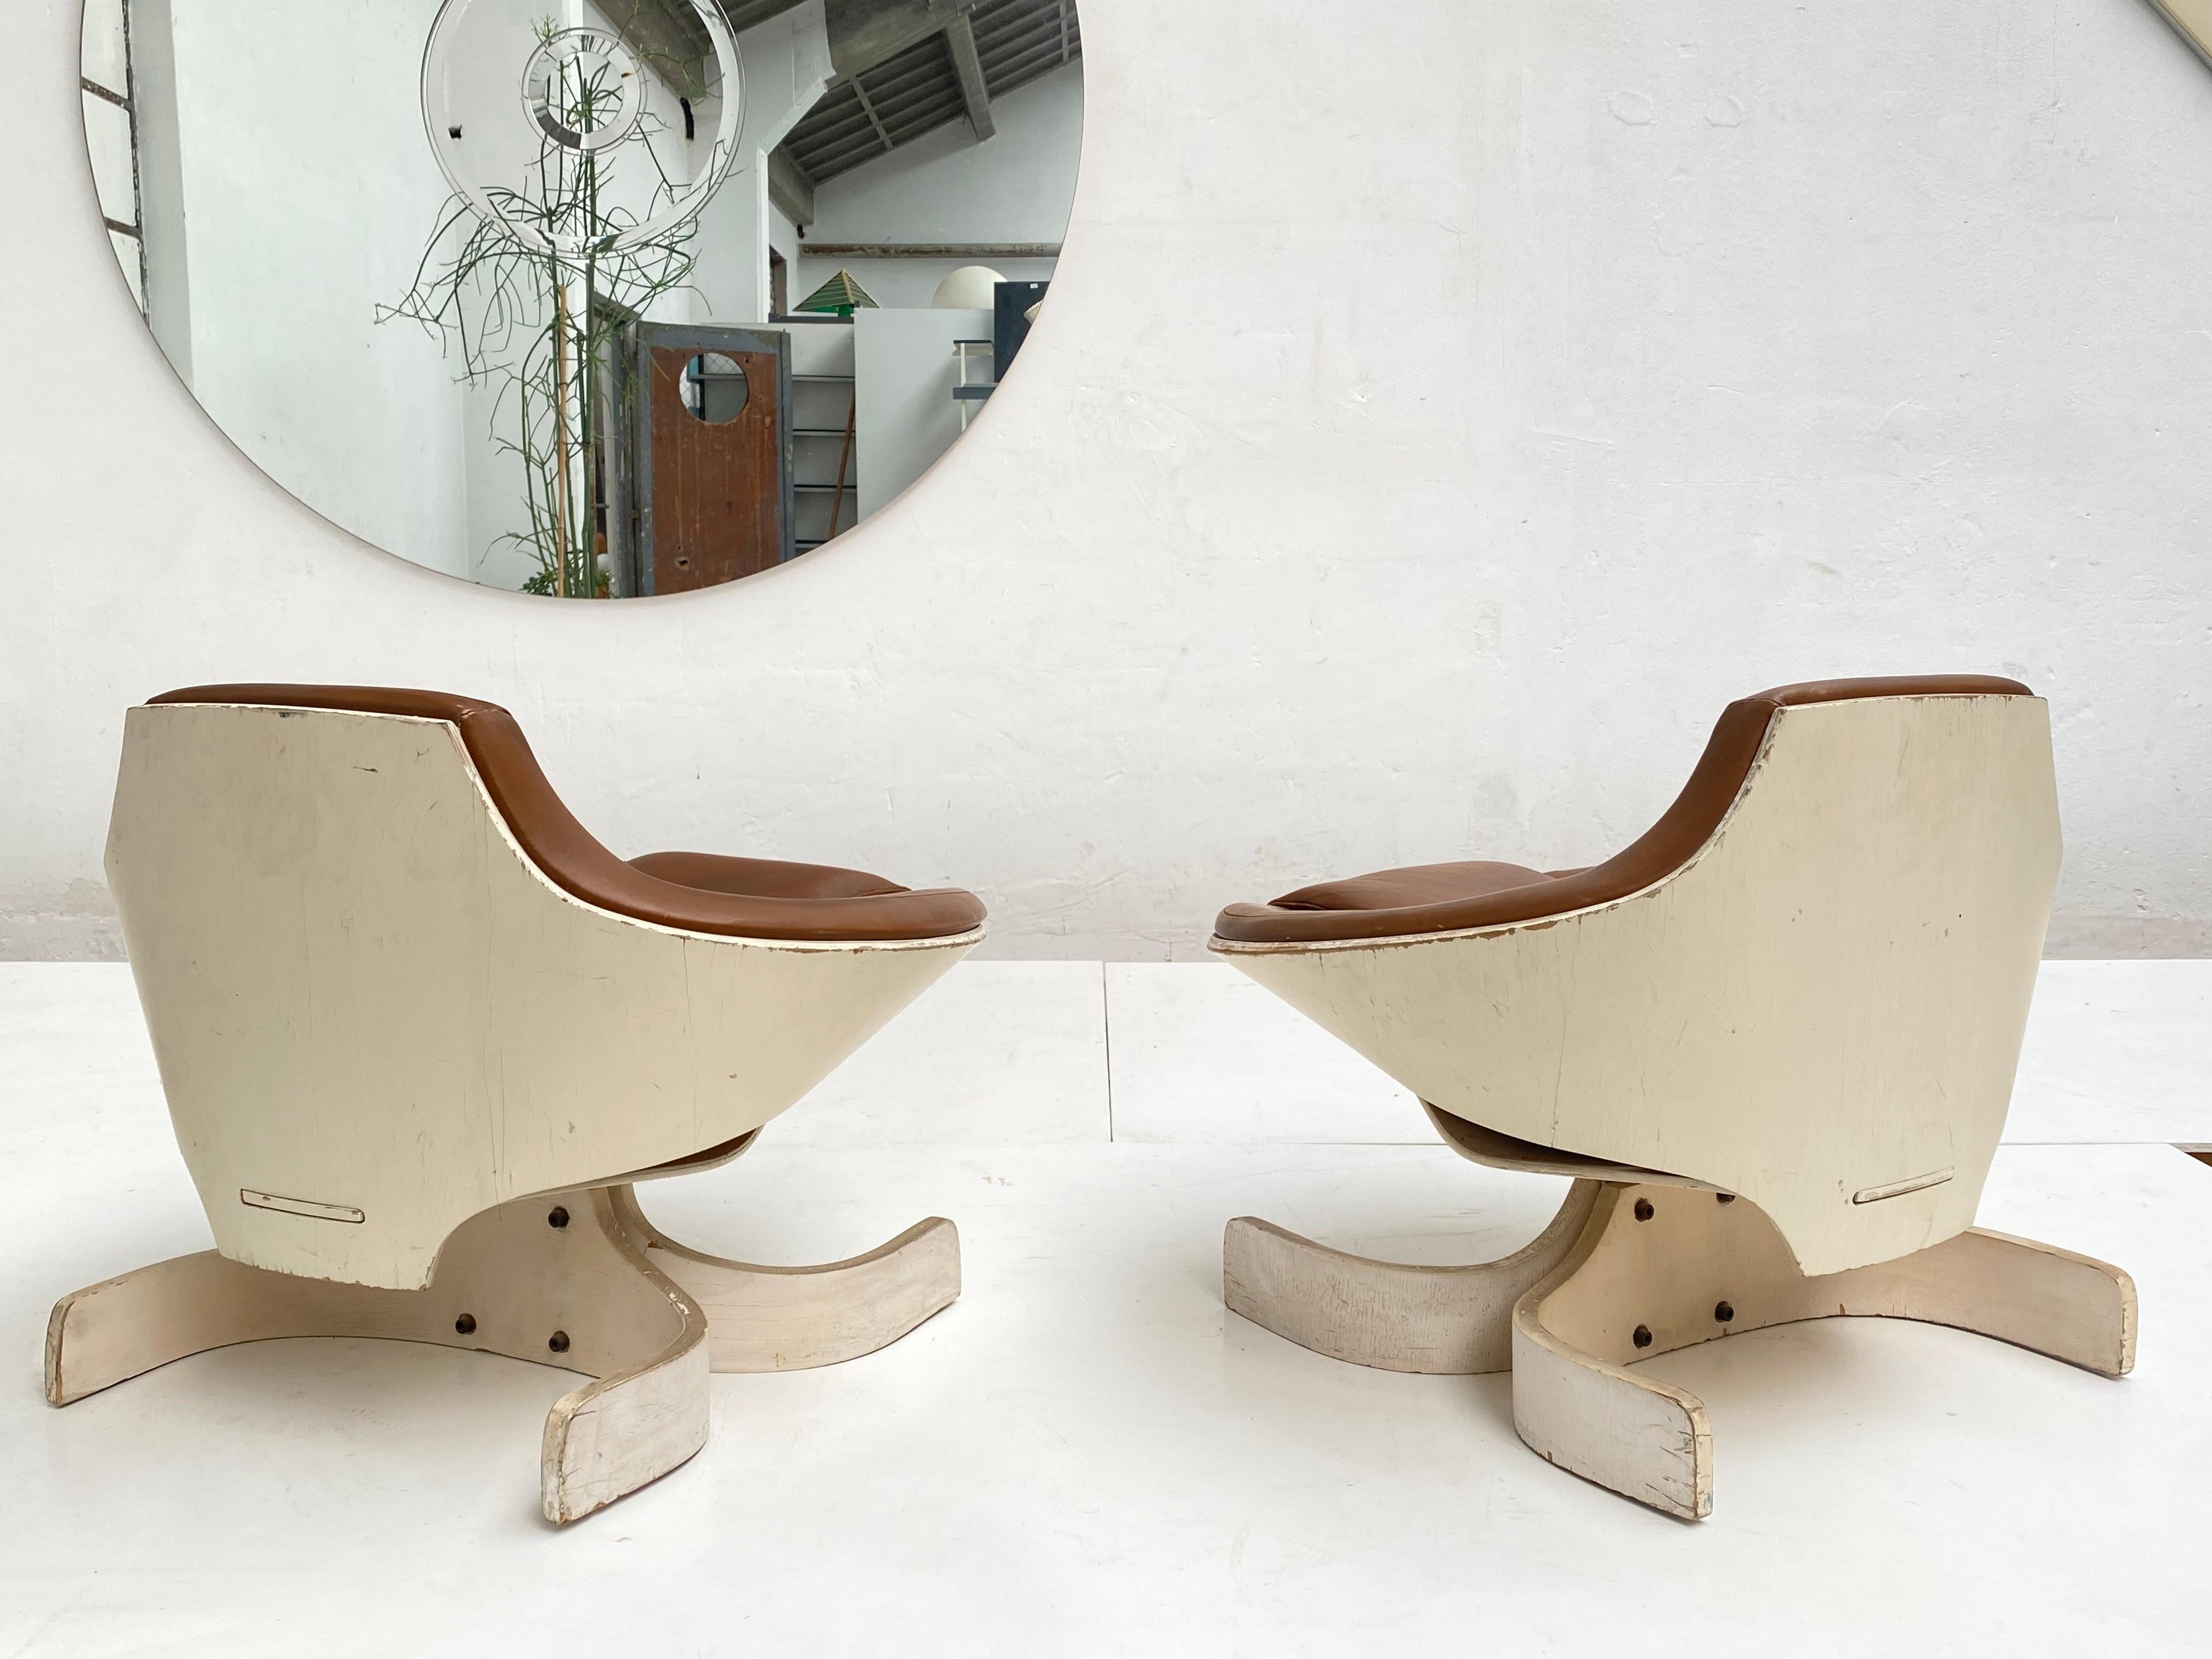 Super Rare Pair of Joe Colombo 'Sella 1001' Lounge Chairs by Comfort 1963 Italy For Sale 12